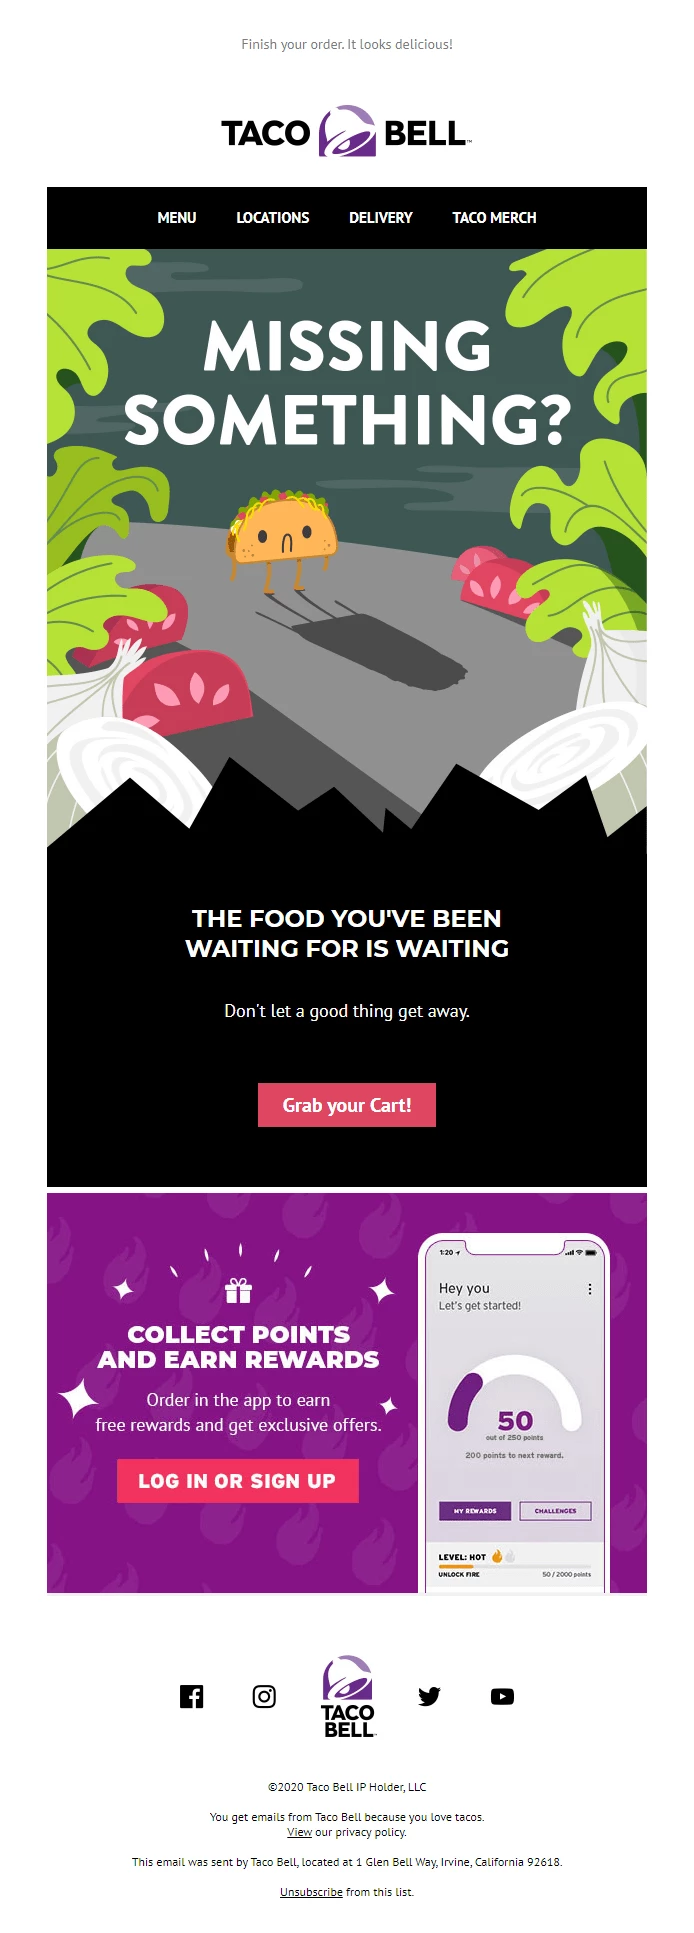 Abandoned cart email example from Taco Bell